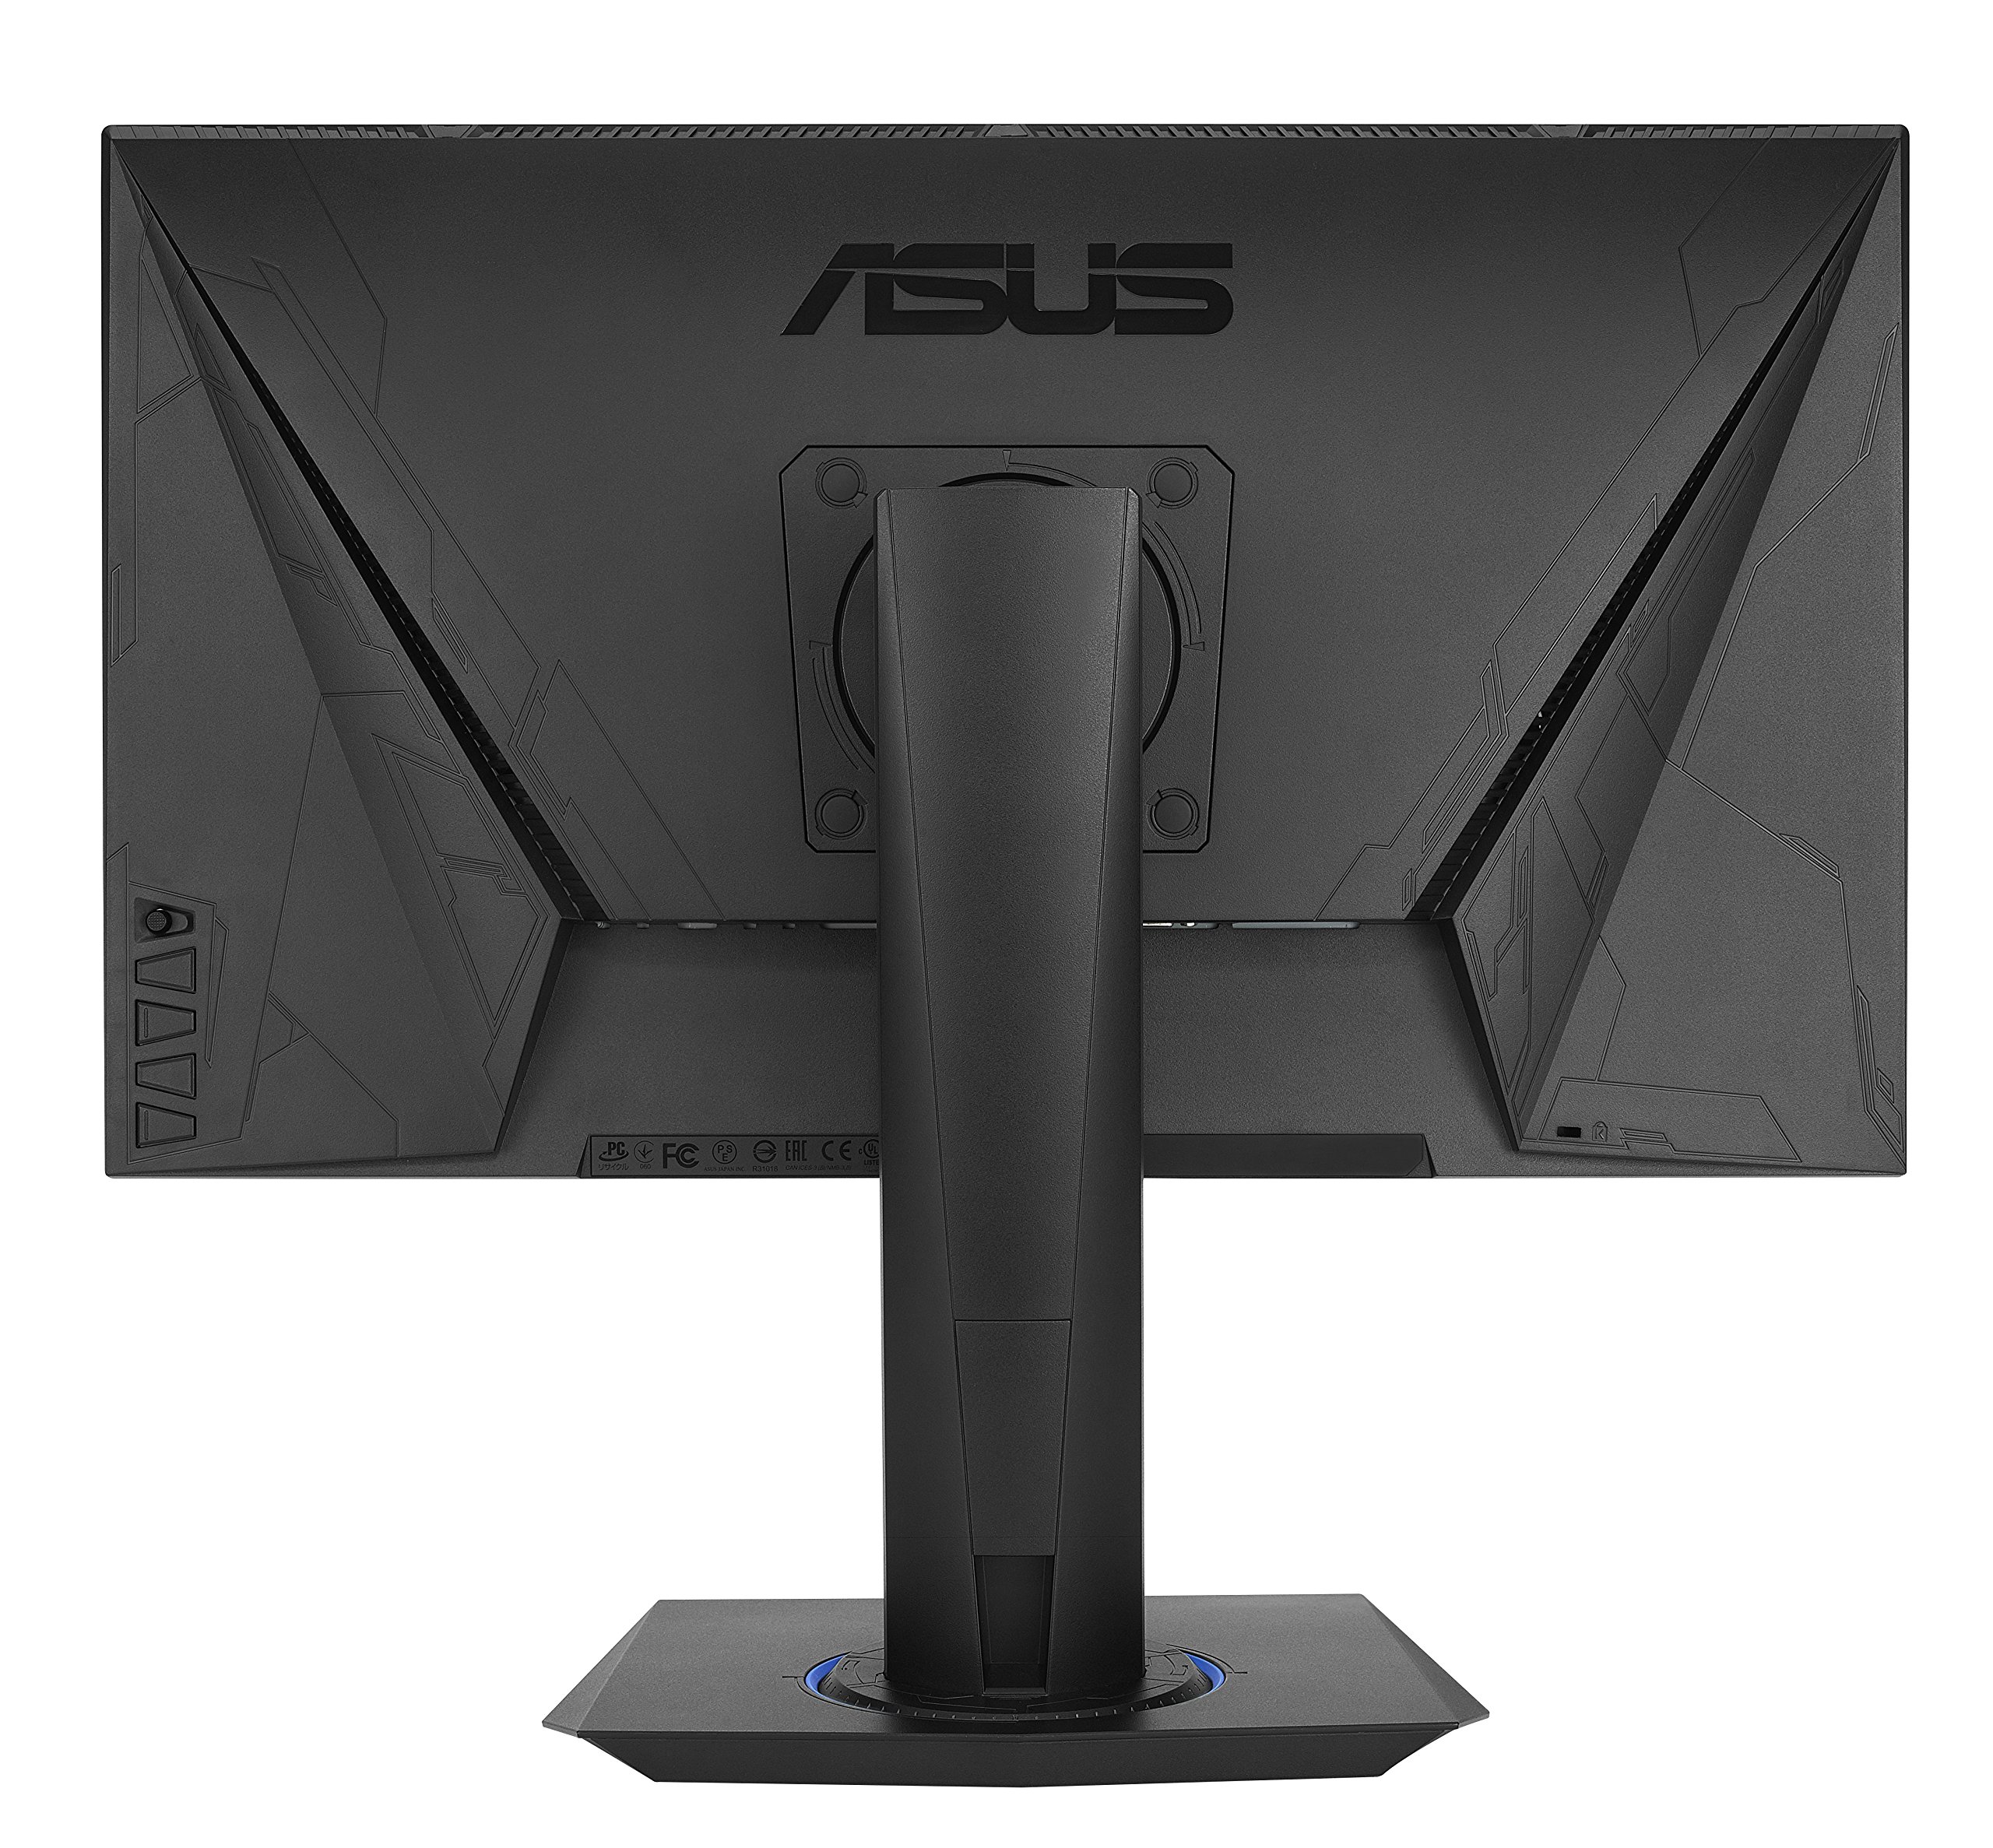 ASUS VG245H 24 inchFull HD 1080p 1ms Dual HDMI Eye Care Console Gaming Monitor with FreeSync/Adaptive Sync, Black, 24-inch